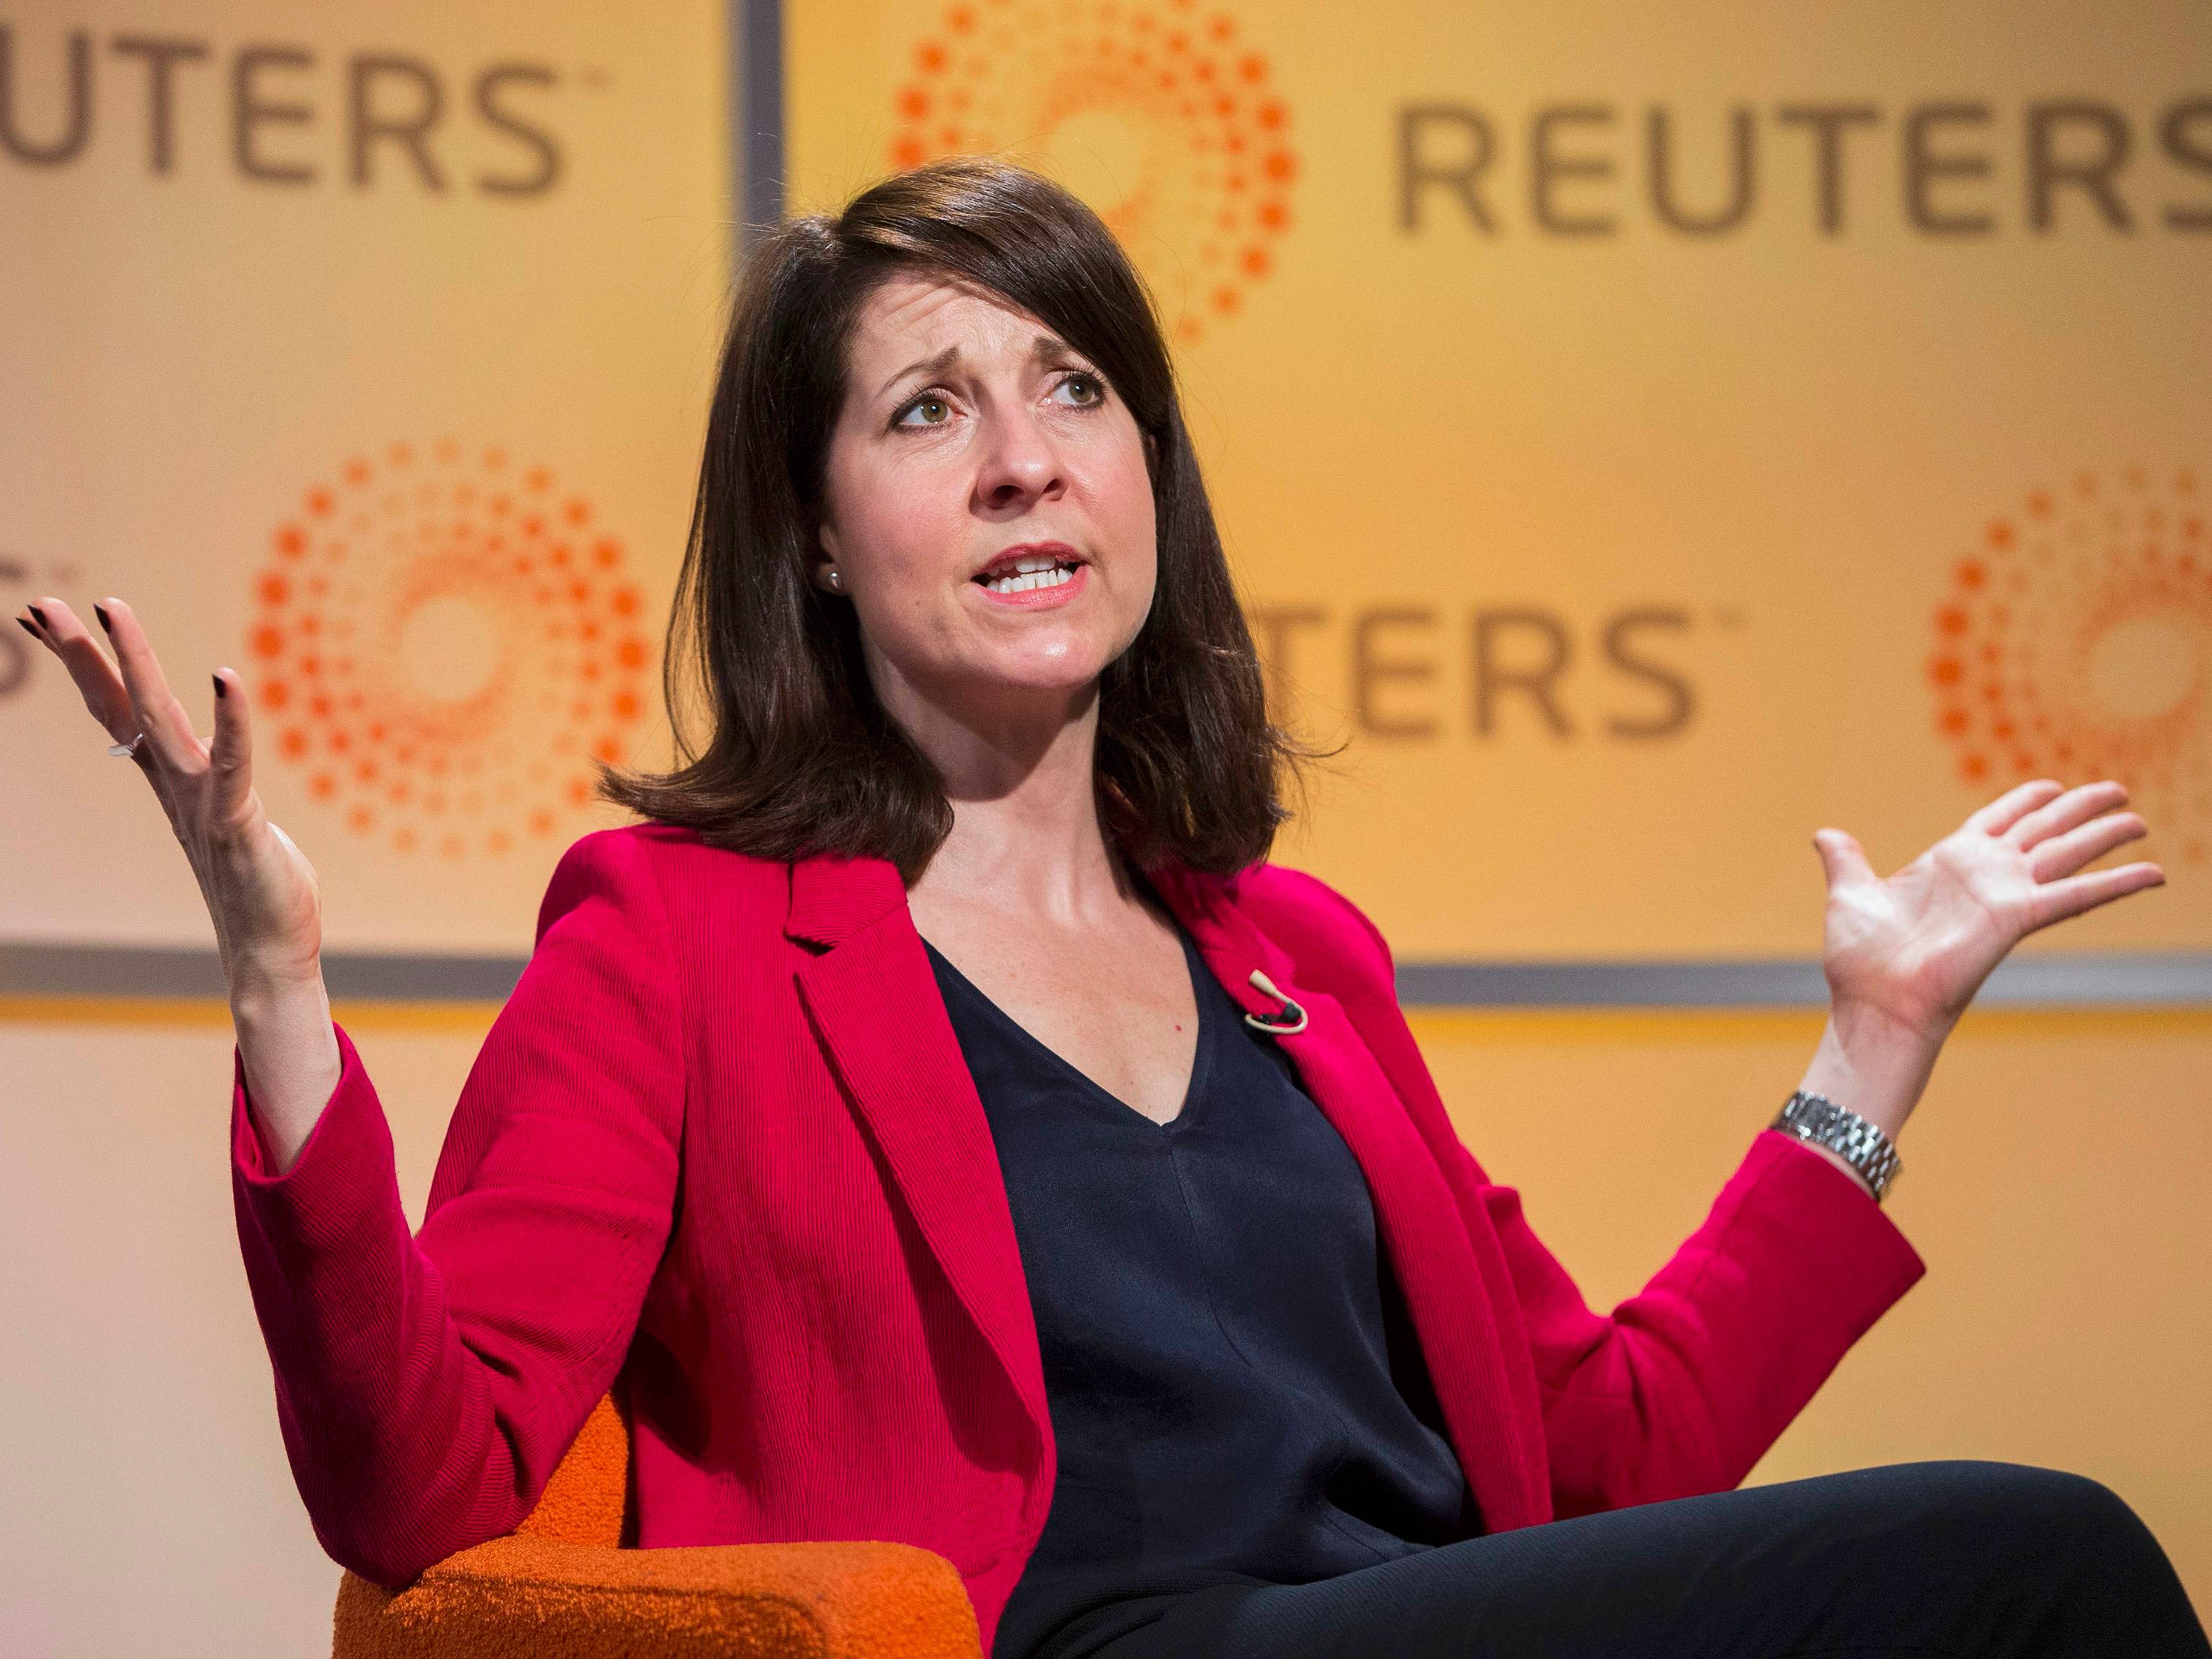 Liz Kendall said being asked about her weight was 'unbelievable'